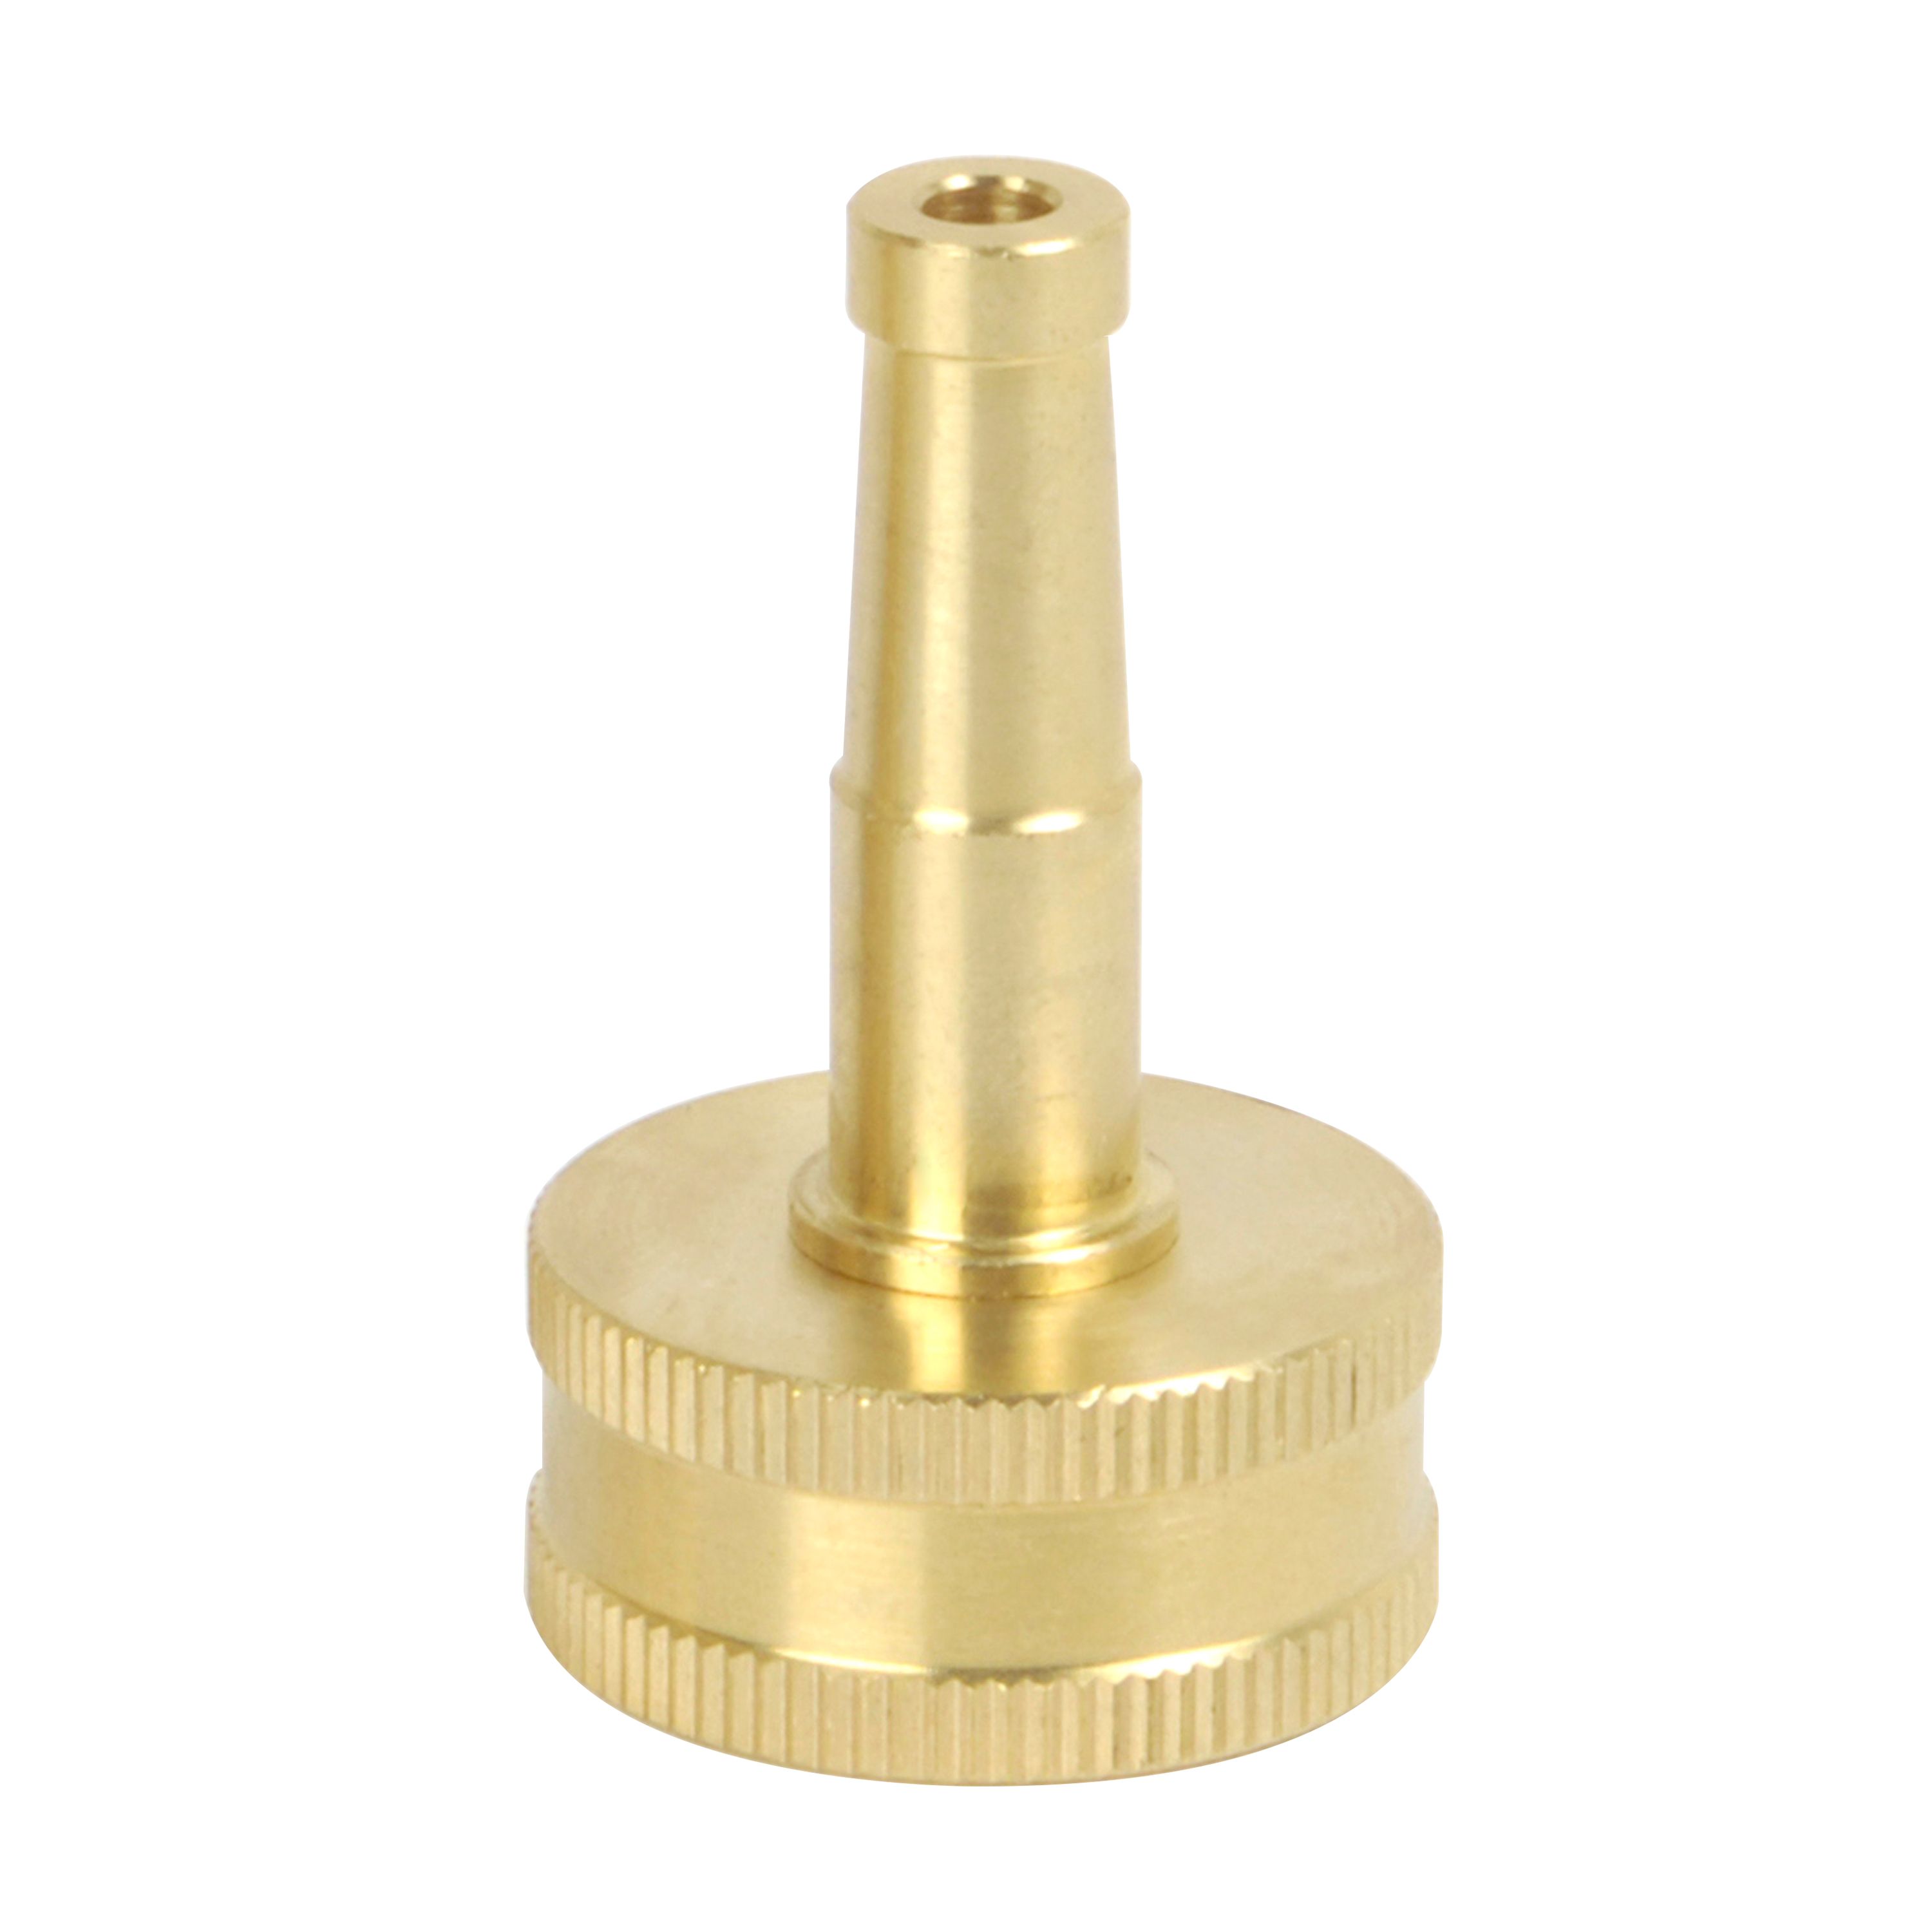 Jet Hose Nozzle Solid Brass Construction Gardening Watering Equipment Nozzles US 